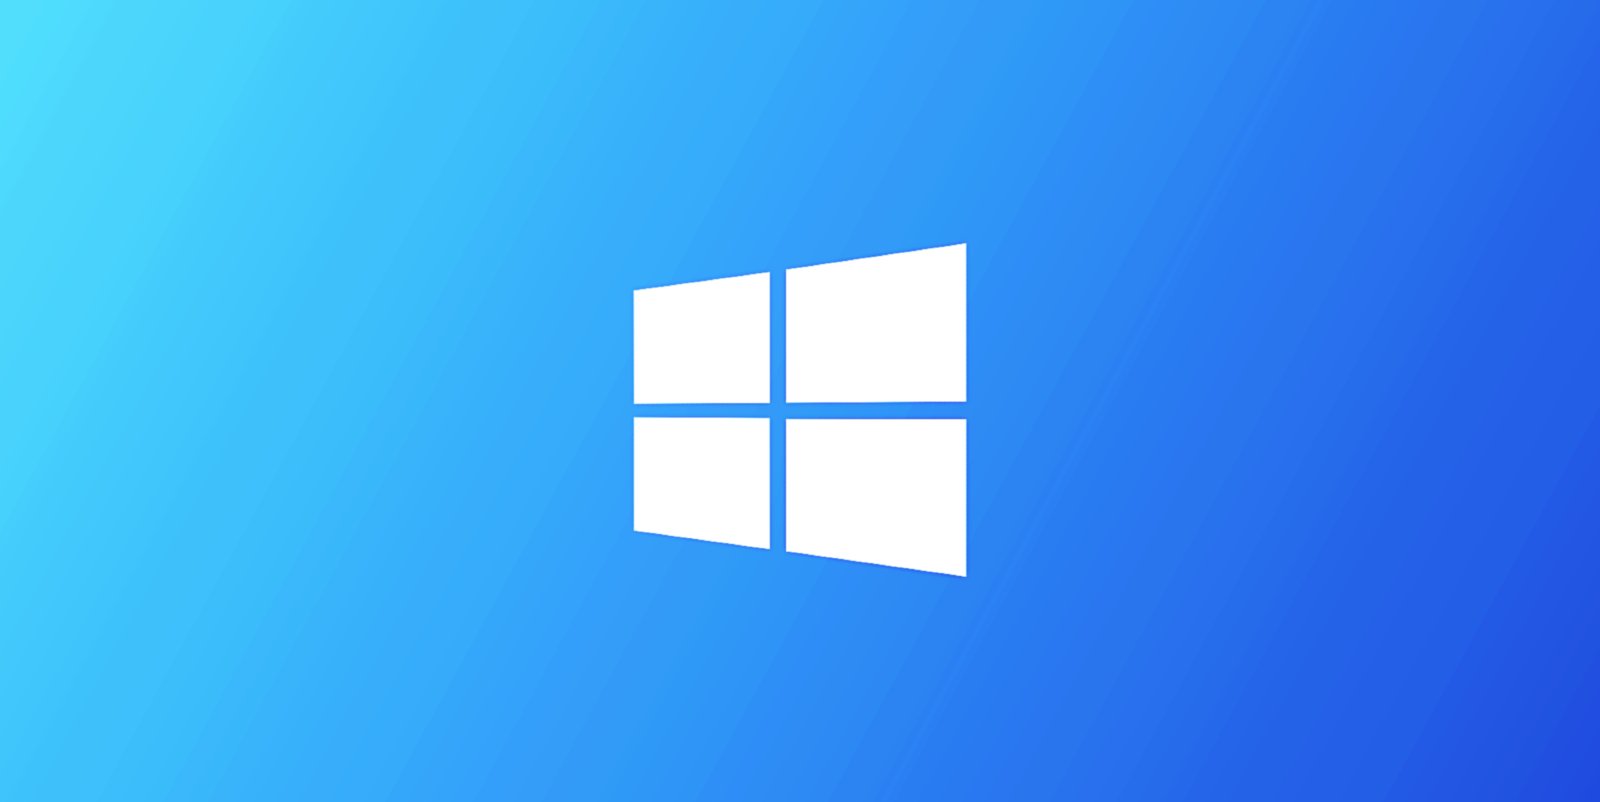 Windows 10 22H2 is coming, here's everything we know